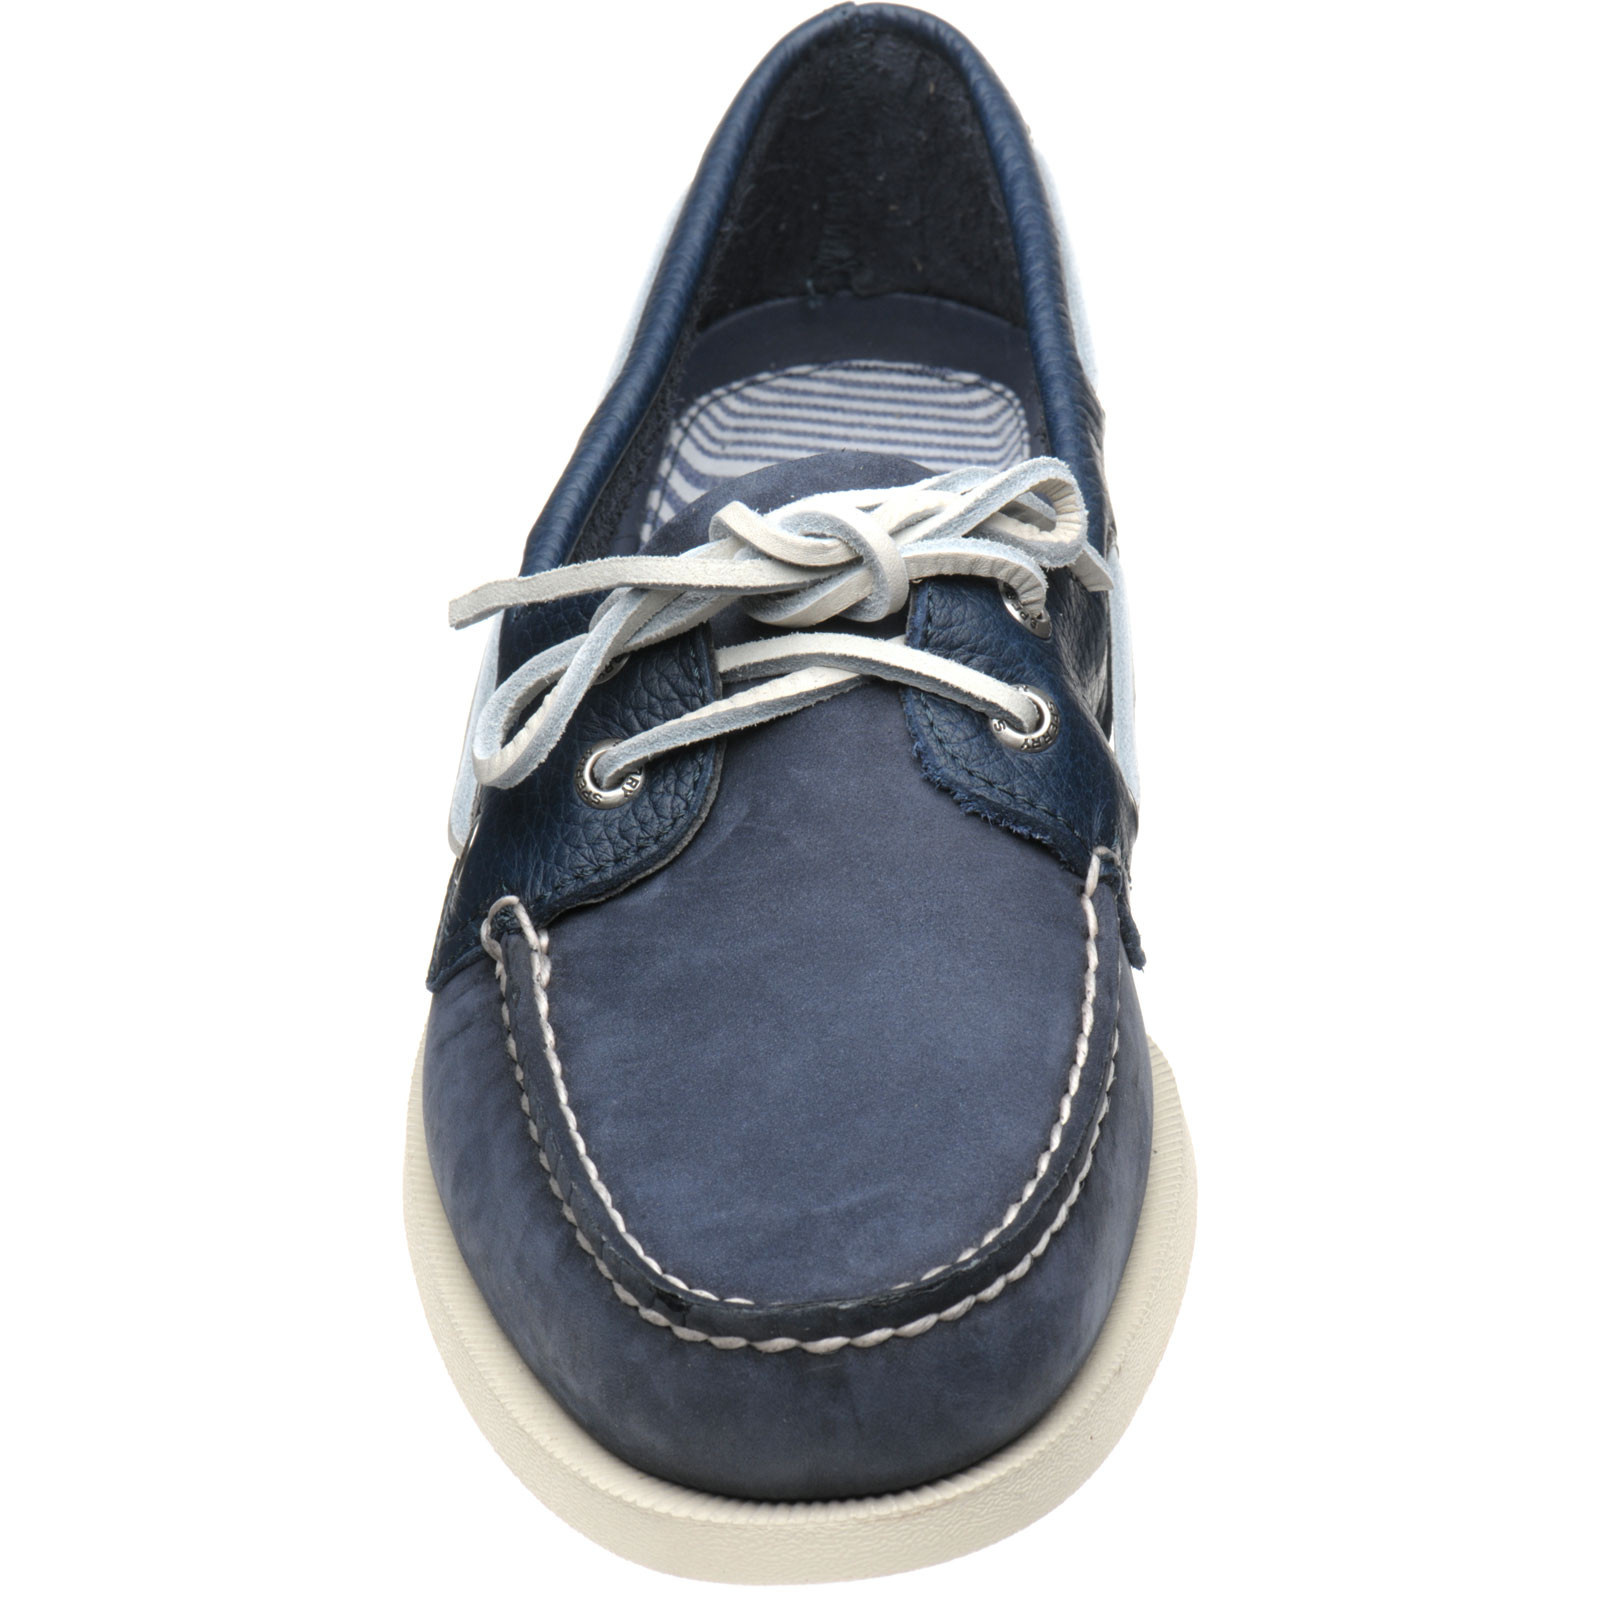 Sperry shoes | Sperry Shoes | A/O Tumbled rubber-soled Derby shoes in ...